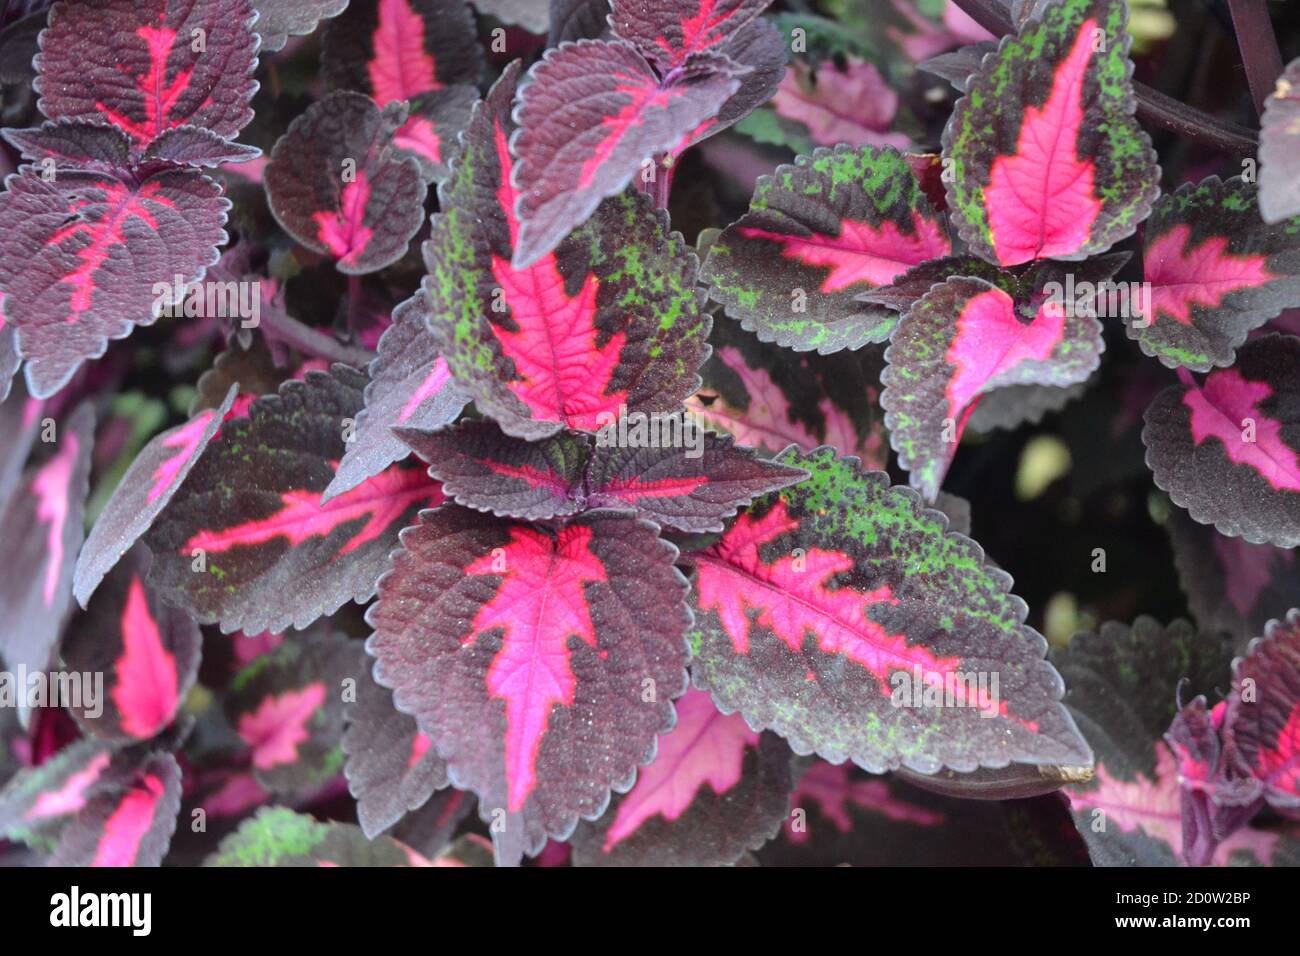 Plant with colorful leaves. Stock Photo